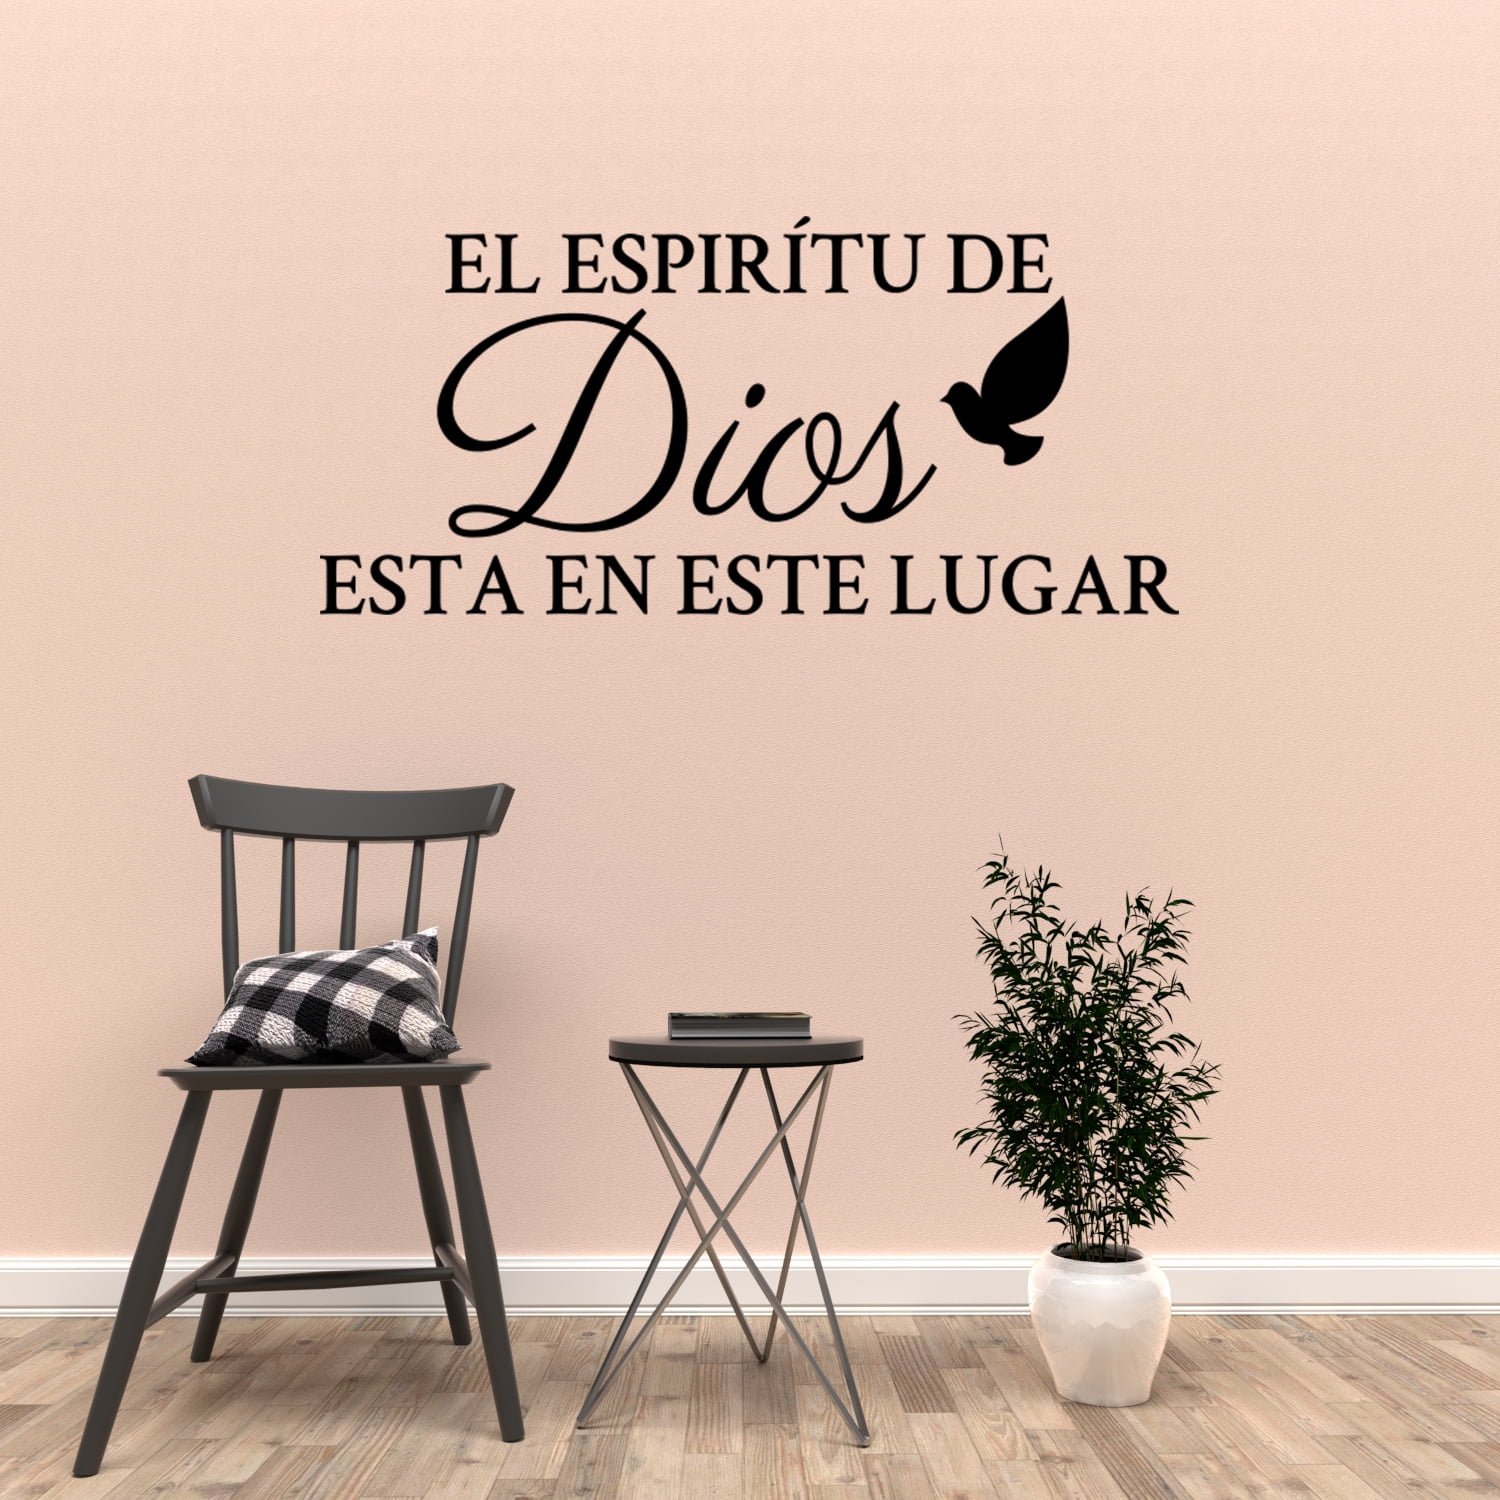 Spanish Wall Decal Vinyl Stickers Motivation Quote Kids Bedroom Art Decoration 